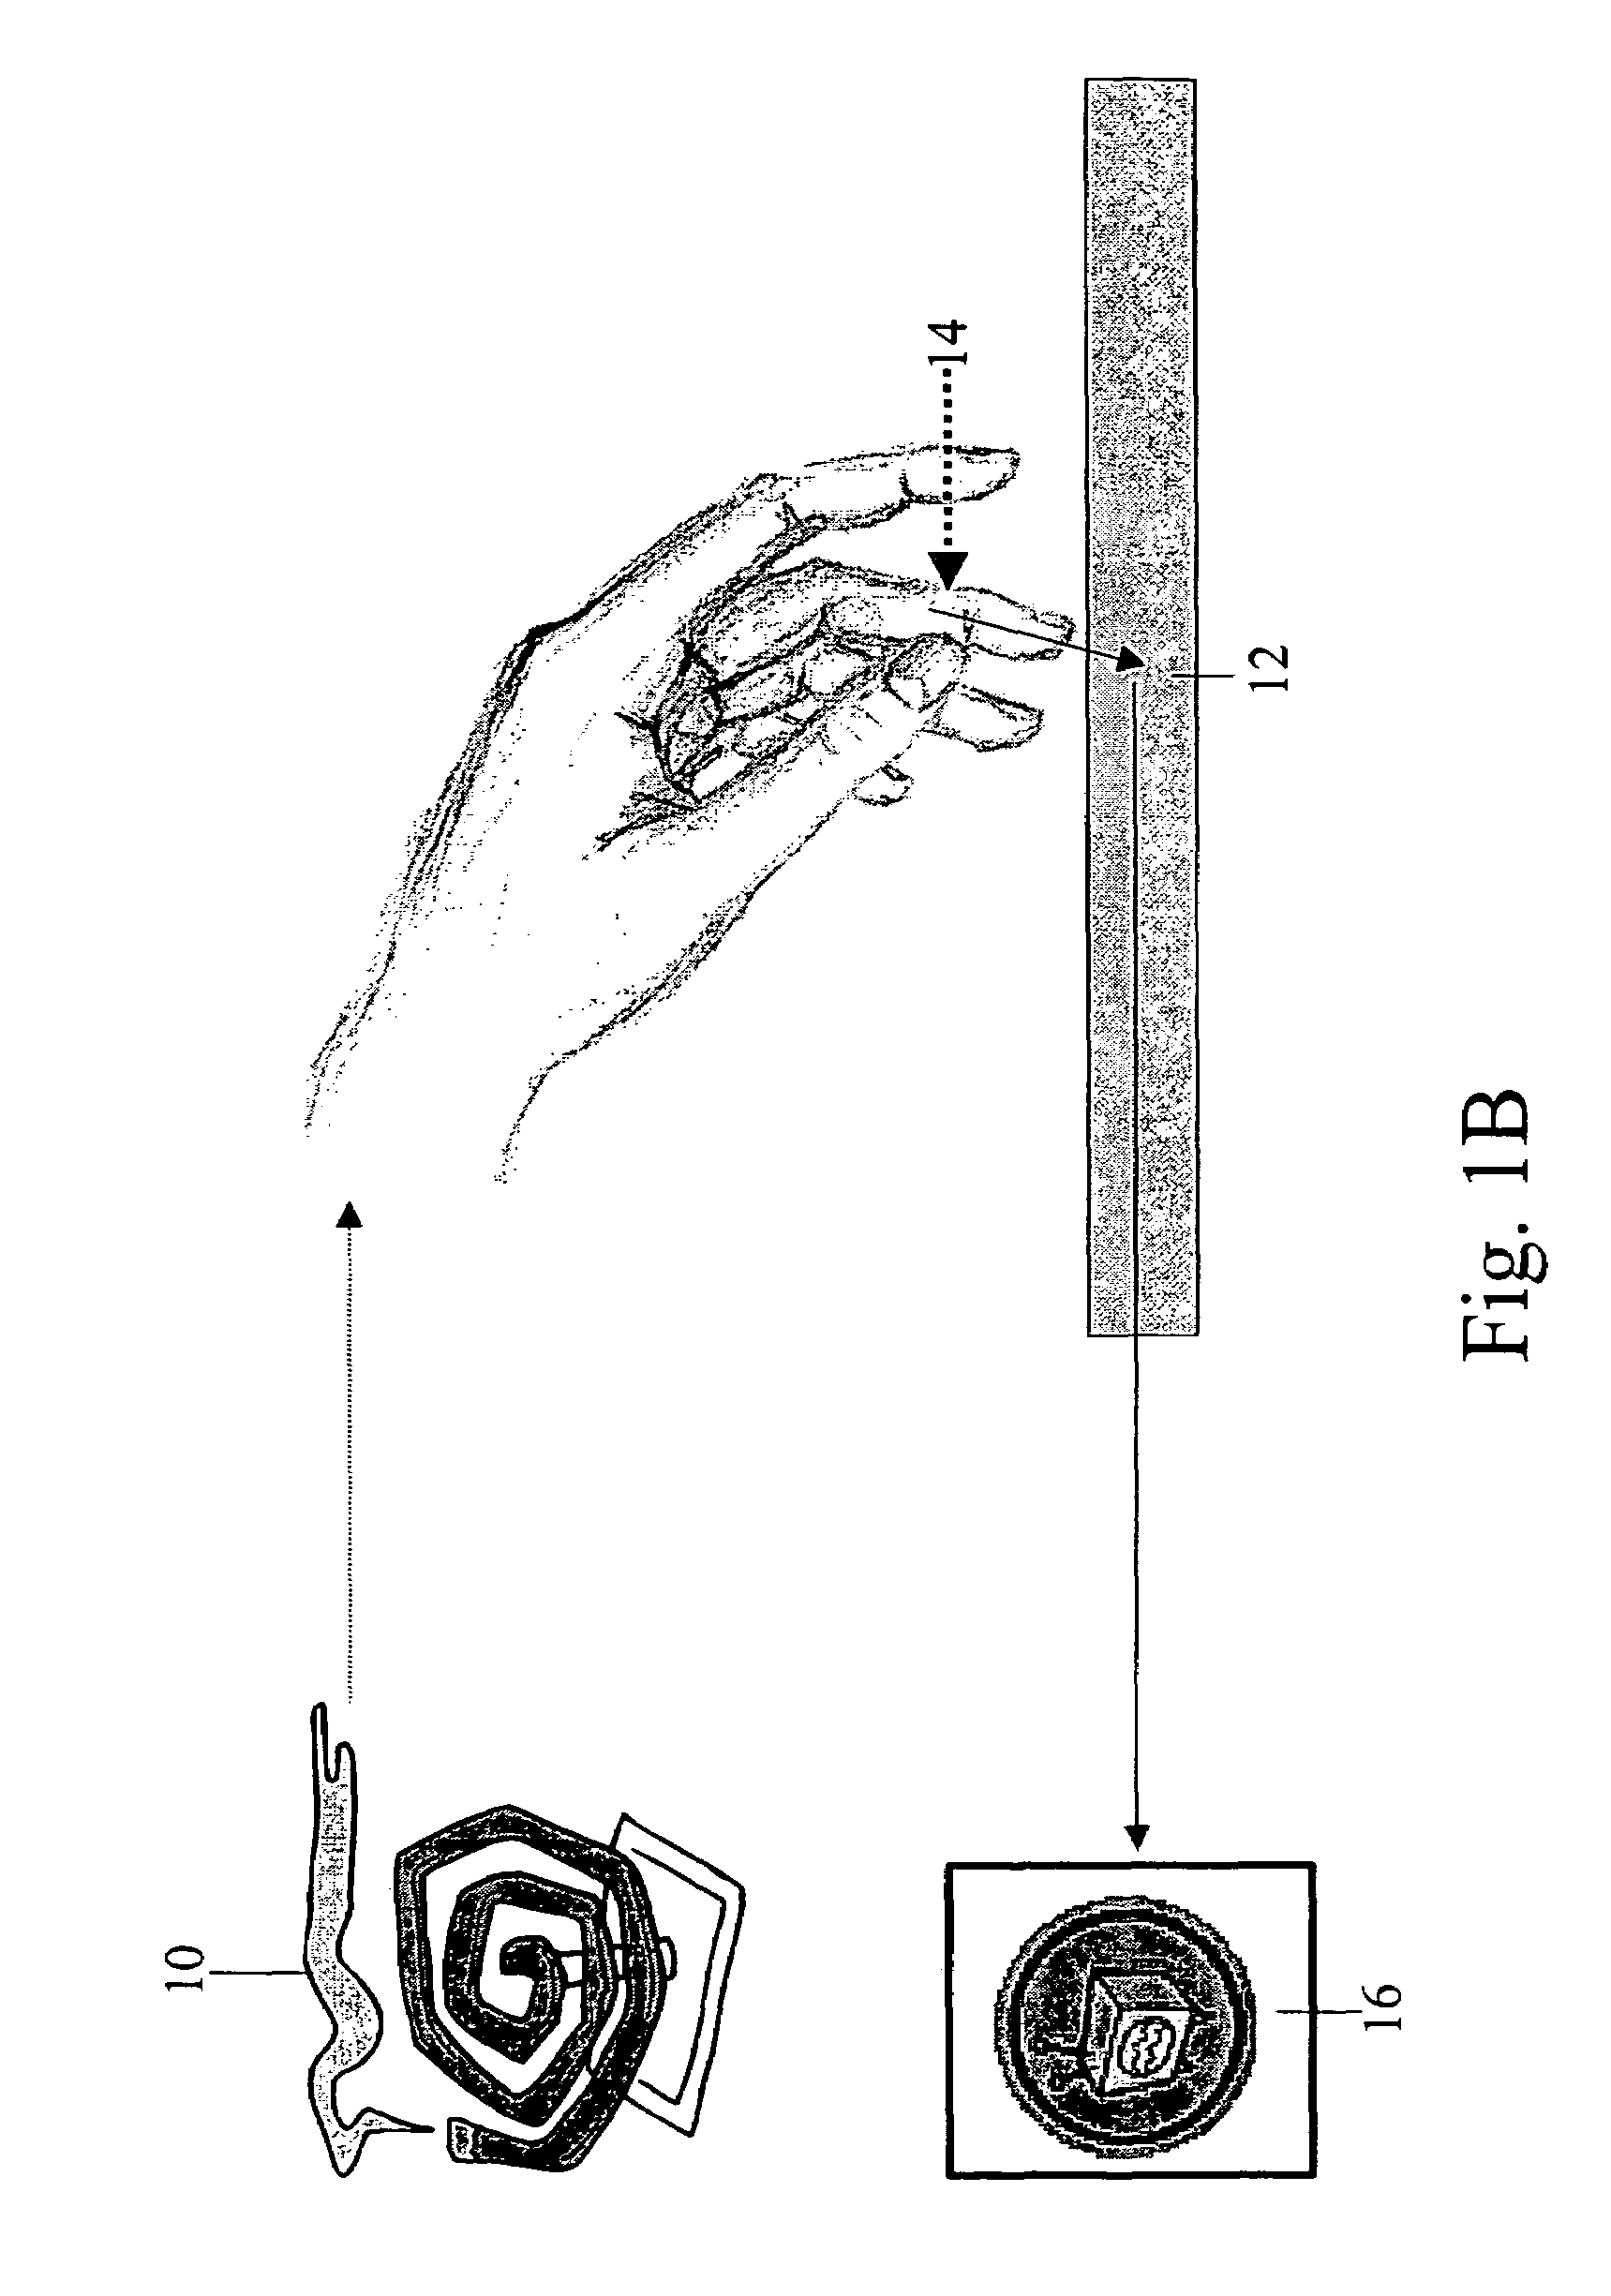 Touch detection for a digitizer